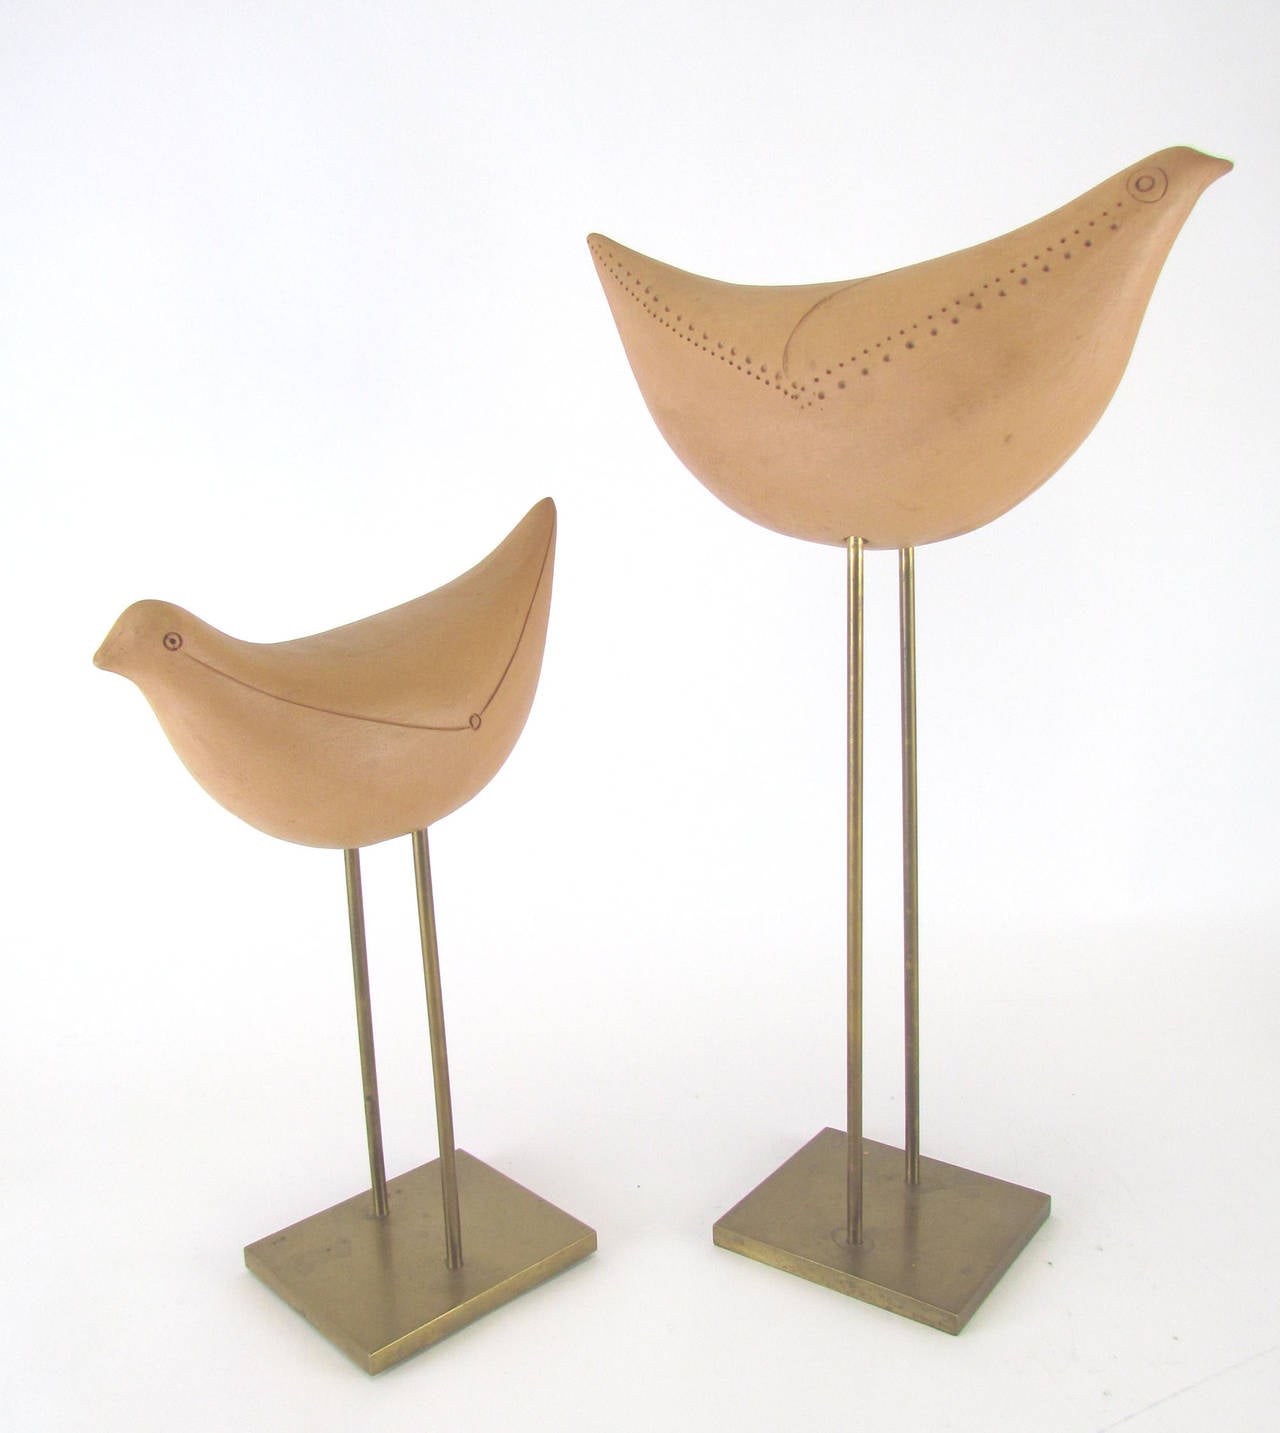 Pair of birds in unglazed terracotta with incised decoration, designed by Aldo Londi for Bitossi, Italy, circa 1960s. Rare pair of original editions with leather-like appearance.

Larger one measures 13.5